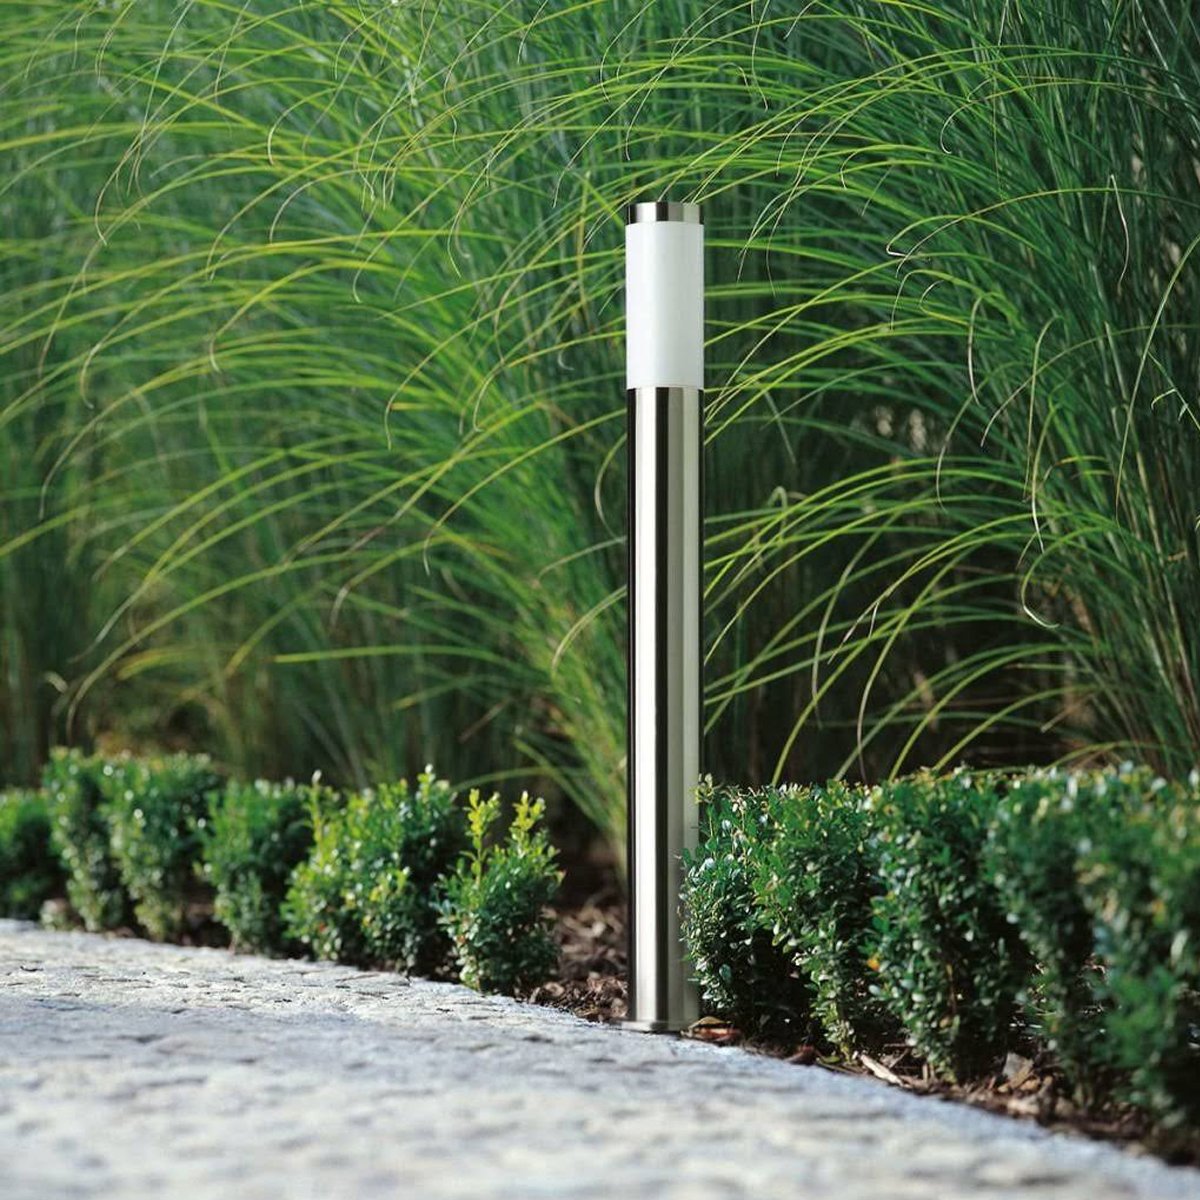 The ASTER 1M post light is the perfect addition to modern outdoor areas. It features a sleek, round design with a stainless-steel body and an opal polycarbonate diffuser. Ideal for gardens, driveways, workspaces, pubs, and hotels, this post light offers both illumination and security.